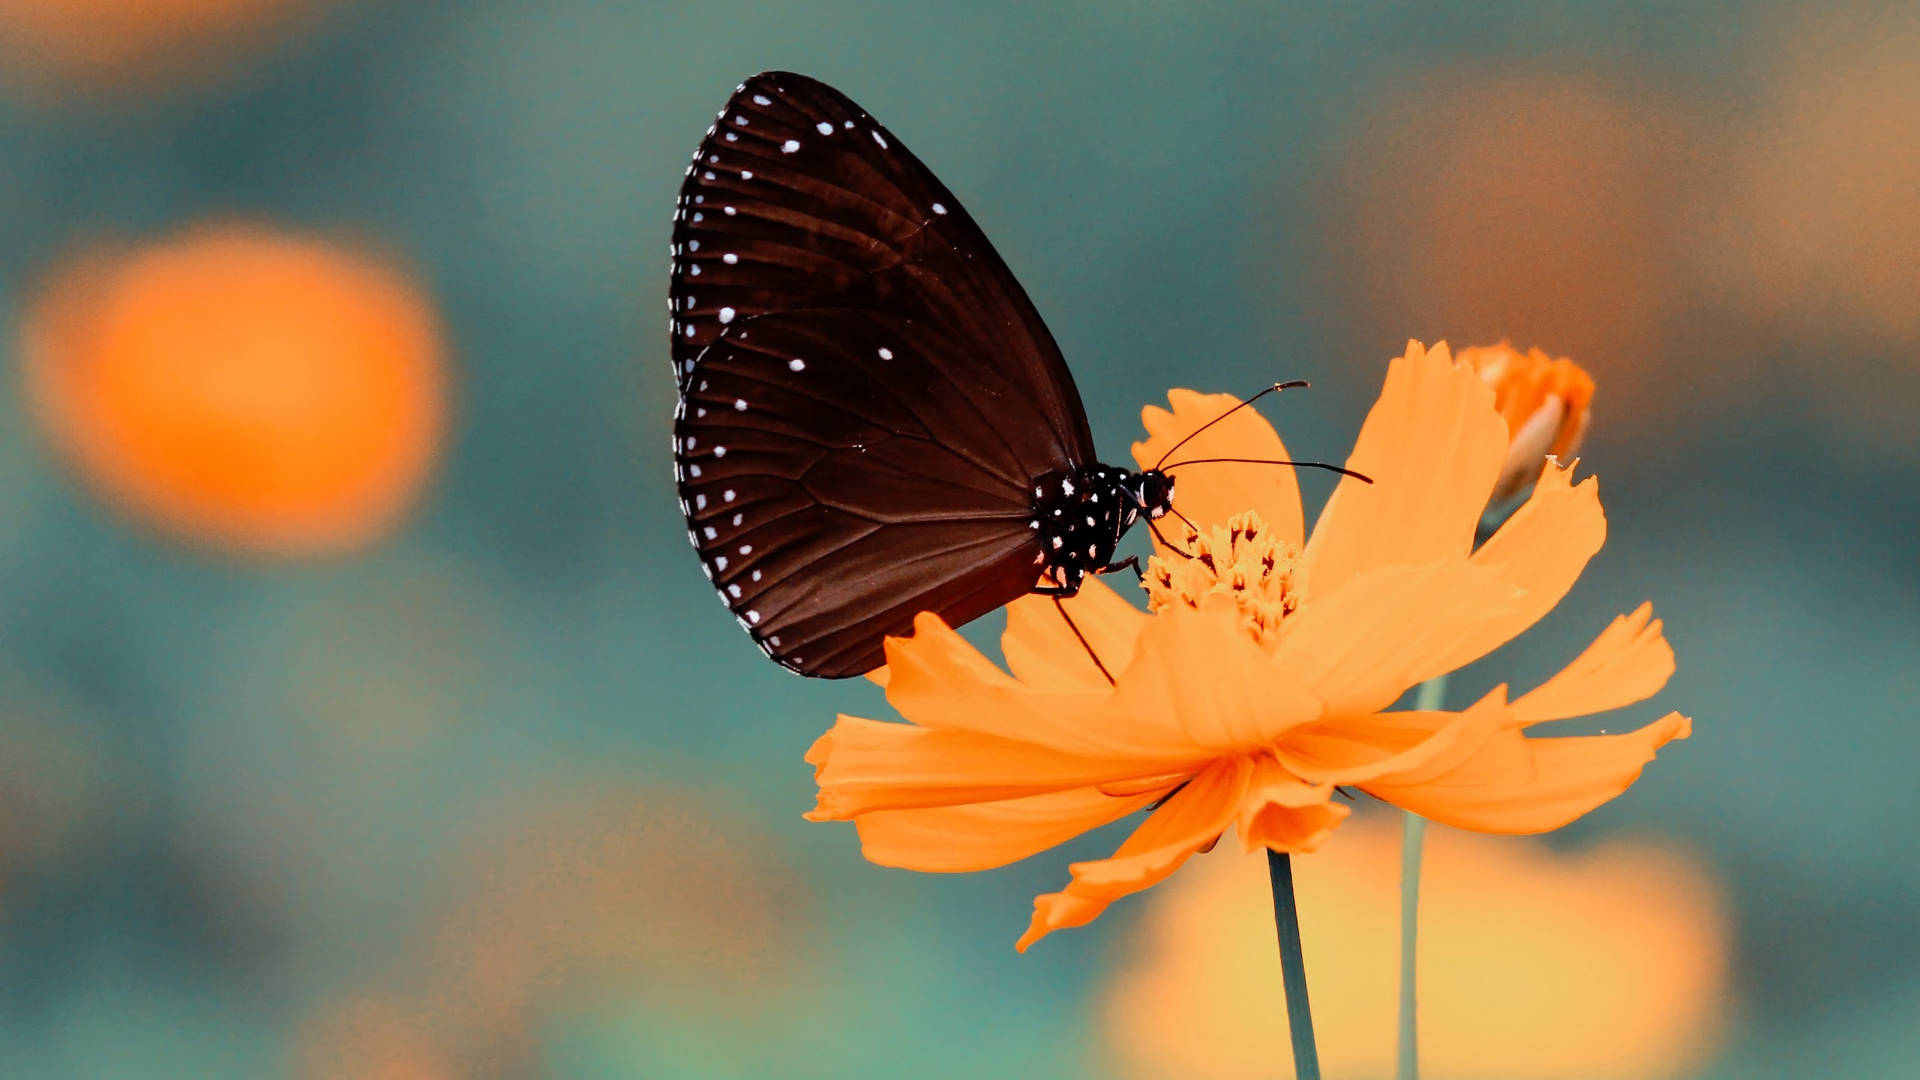 Download Full Screen 4k Flowers Cosmos And Butterfly Wallpaper | Wallpapers .com